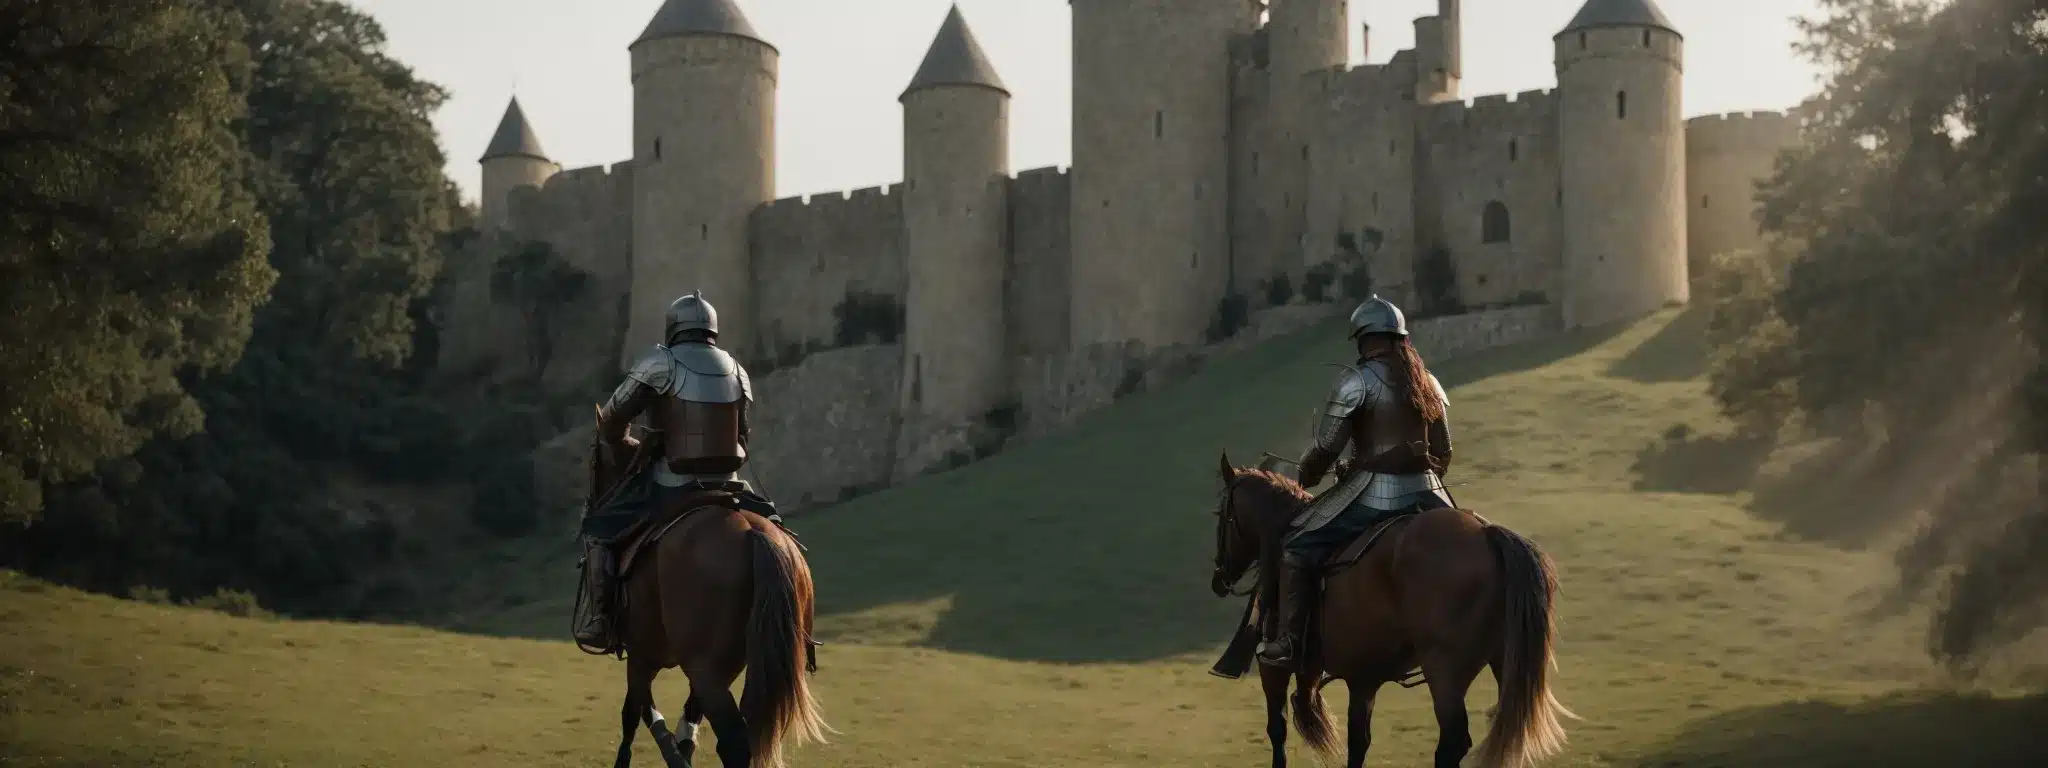 A Knight On Horseback Galloping Toward A Castle, Symbolizing A Brand'S Journey Towards Building Enduring Customer Loyalty.